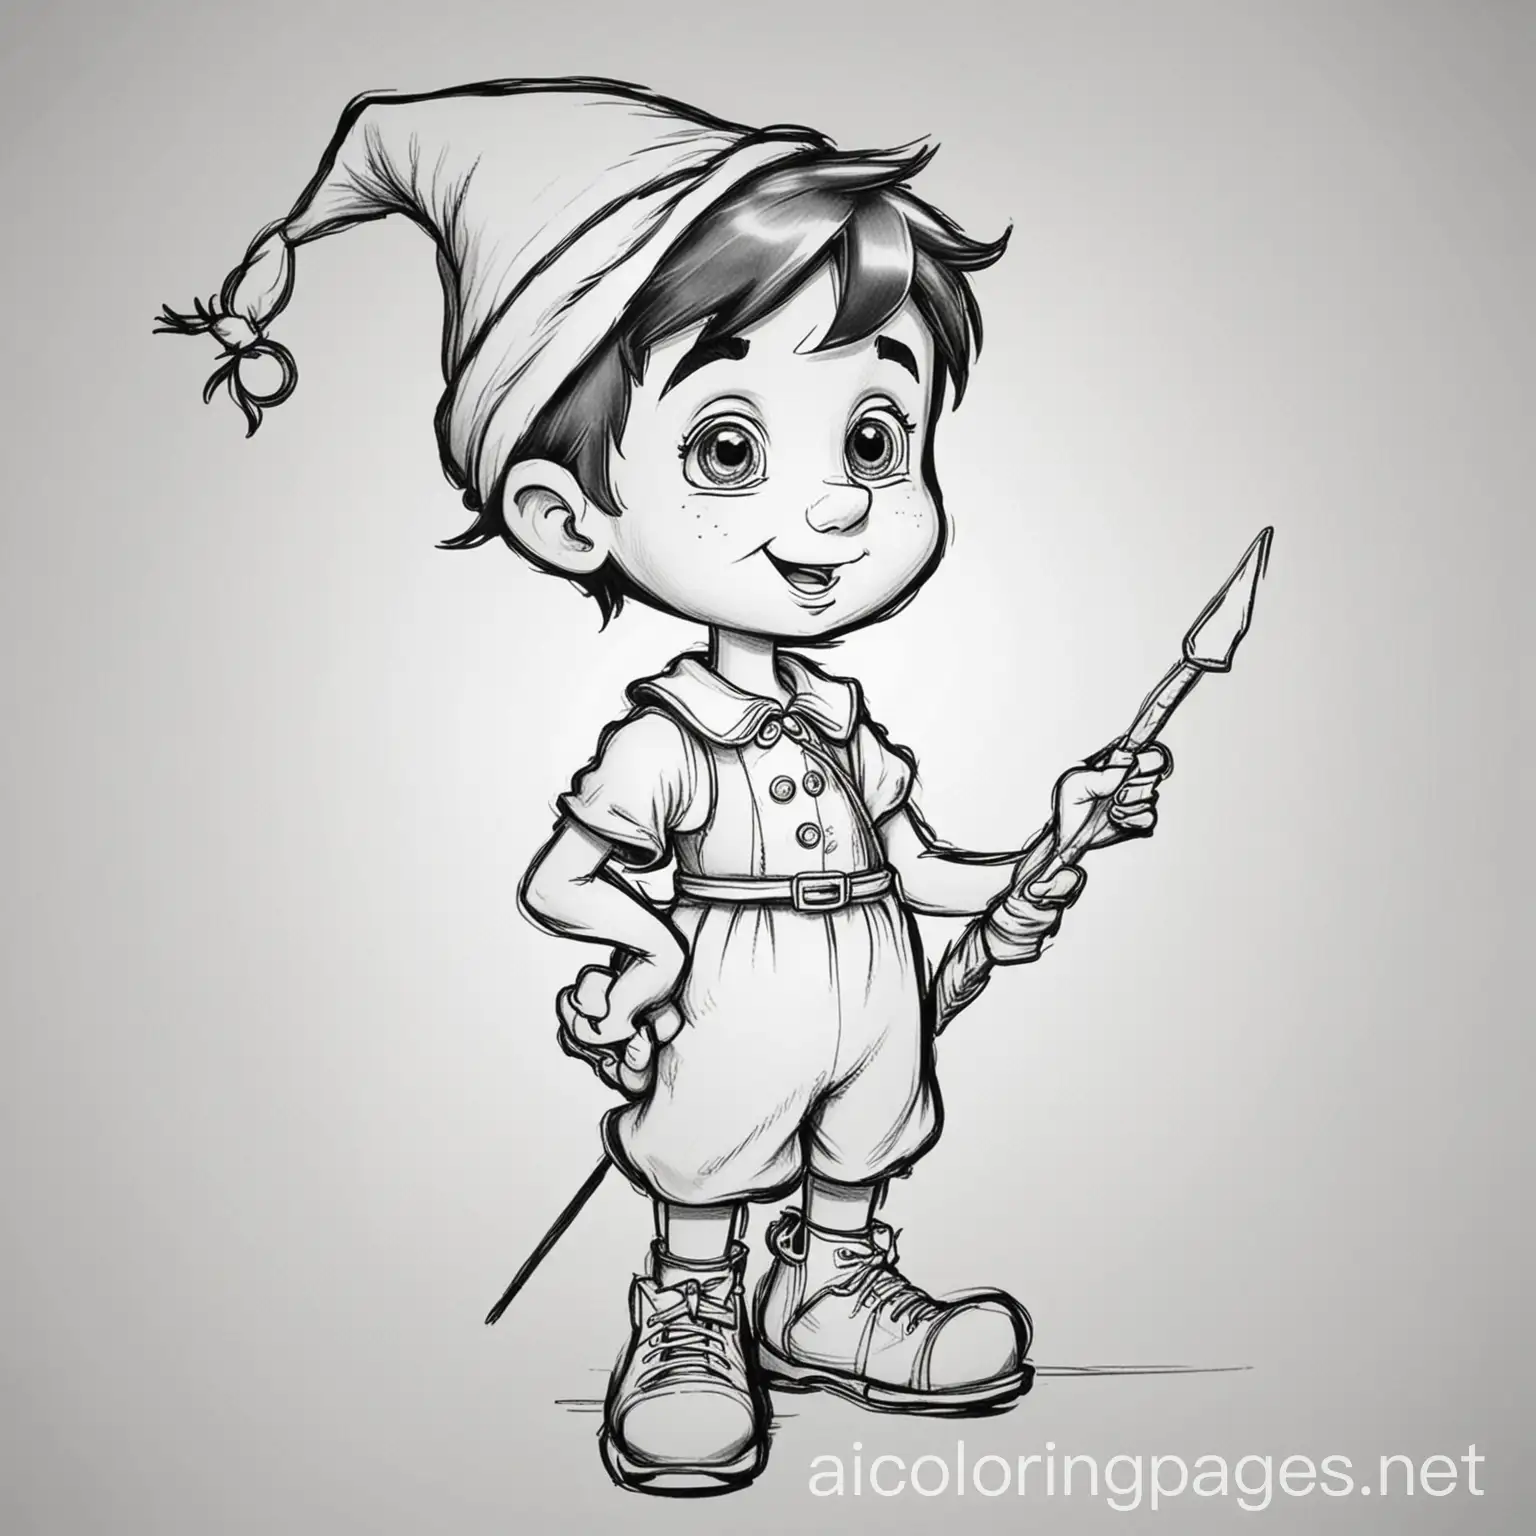 el cuento de pinocho, Coloring Page, black and white, line art, white background, Simplicity, Ample White Space. The background of the coloring page is plain white to make it easy for young children to color within the lines. The outlines of all the subjects are easy to distinguish, making it simple for kids to color without too much difficulty